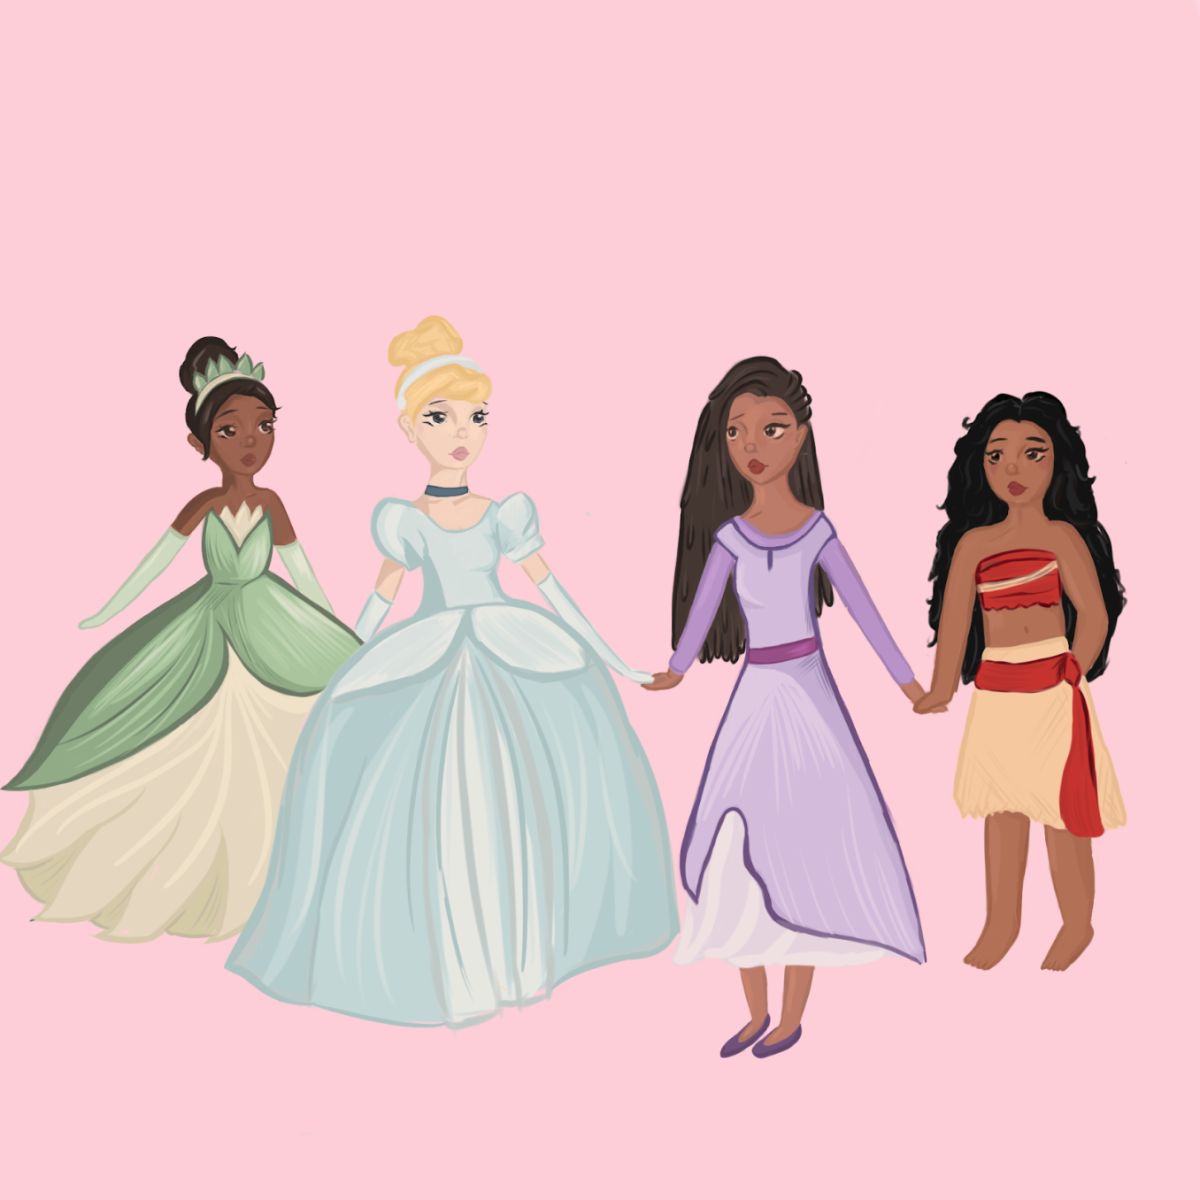 From+left+to+right%3A+Princesses+Tiana+and+Cinderella+stand+with+modern+Princesses+Asha+and+Moana.